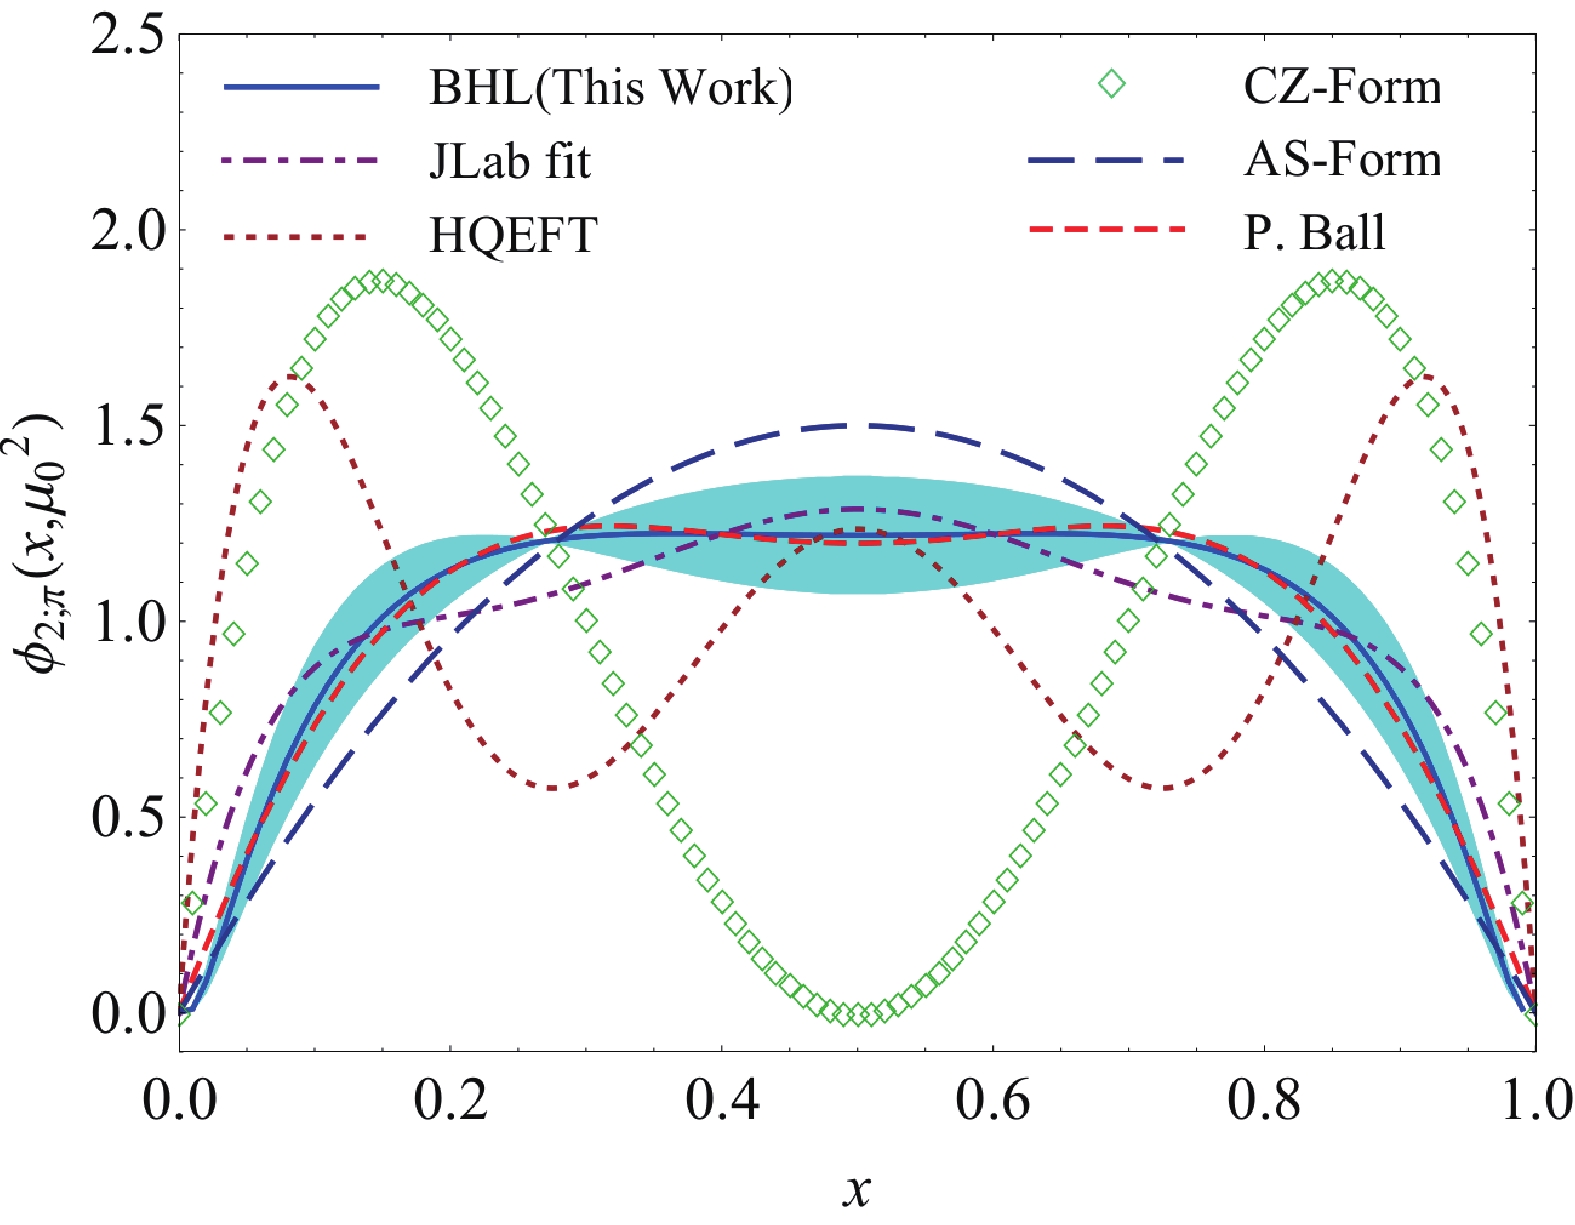 (color online) The behavior of LCDA predicted by the BHL model, including the uncertainties of the input parameters. For comparison, we present the JLab fit [13], QCD SR [18], CZ form [46] and the asymptotic form [47].